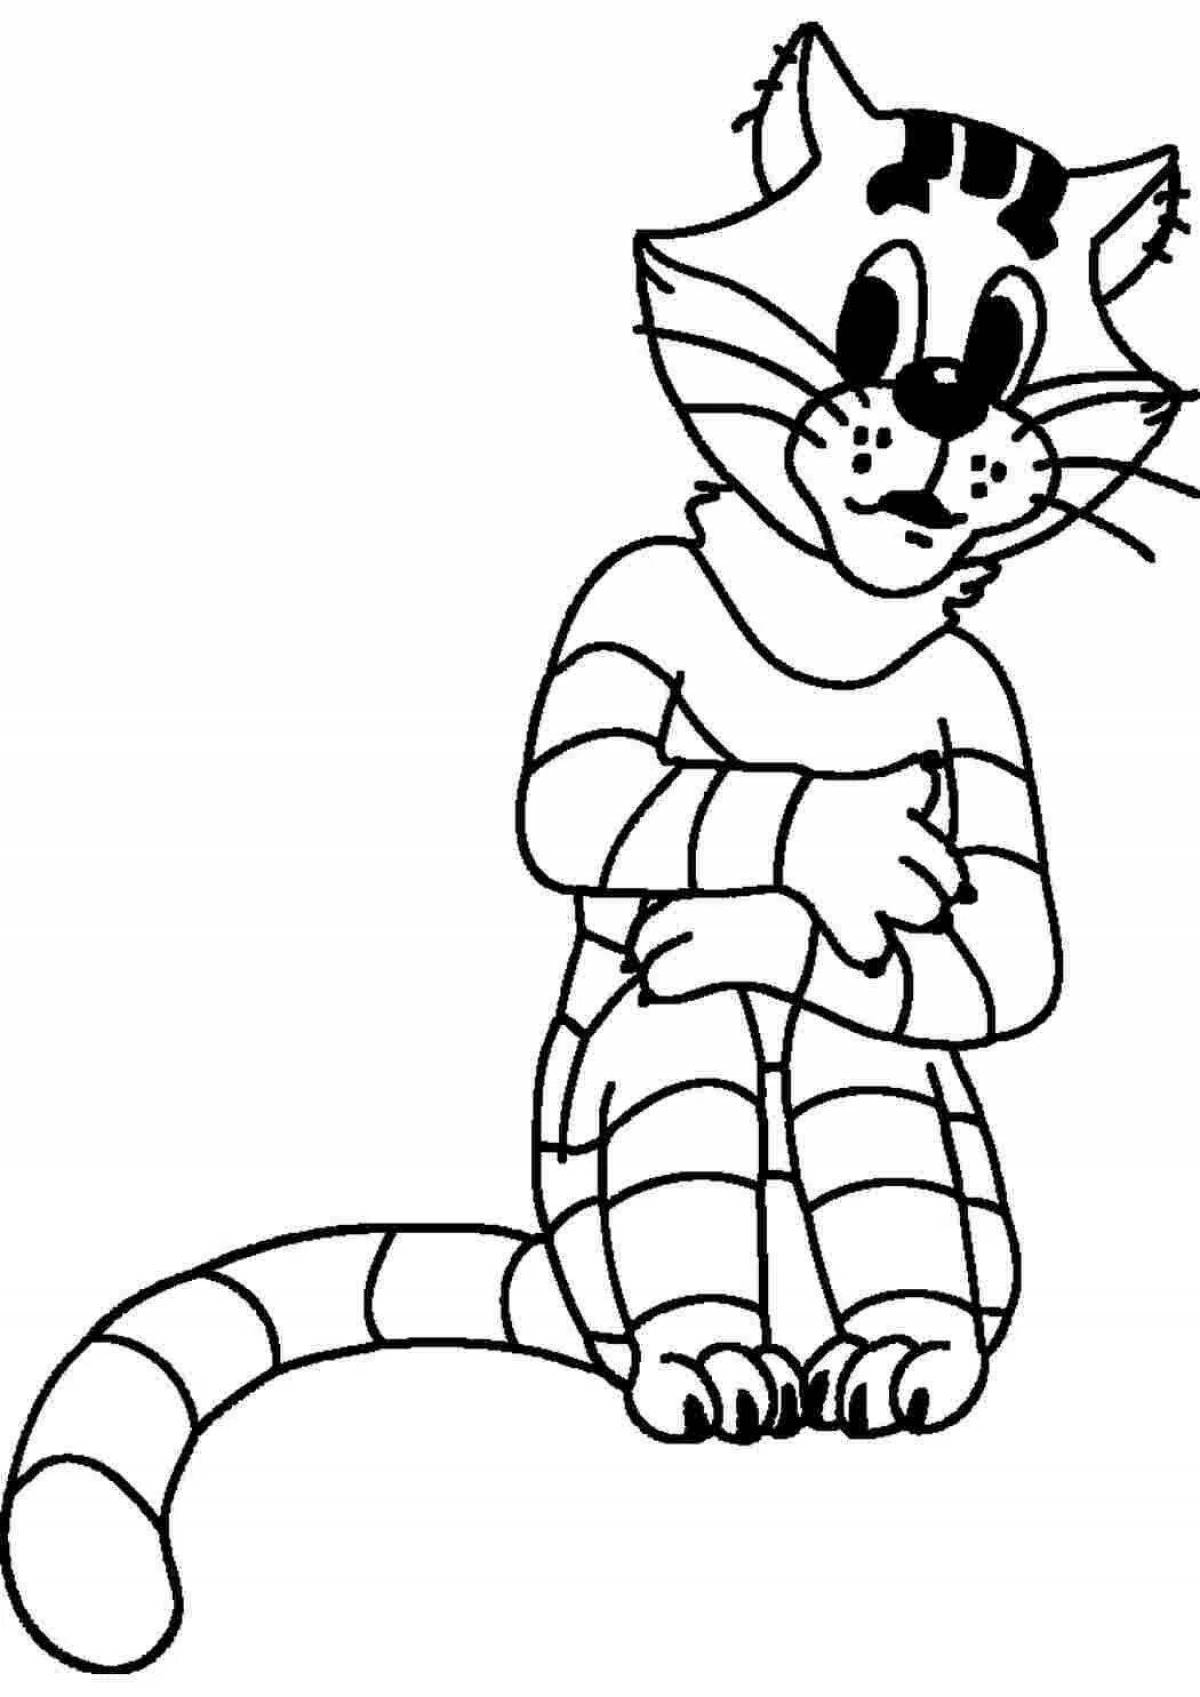 Great junior sailor skin coloring page